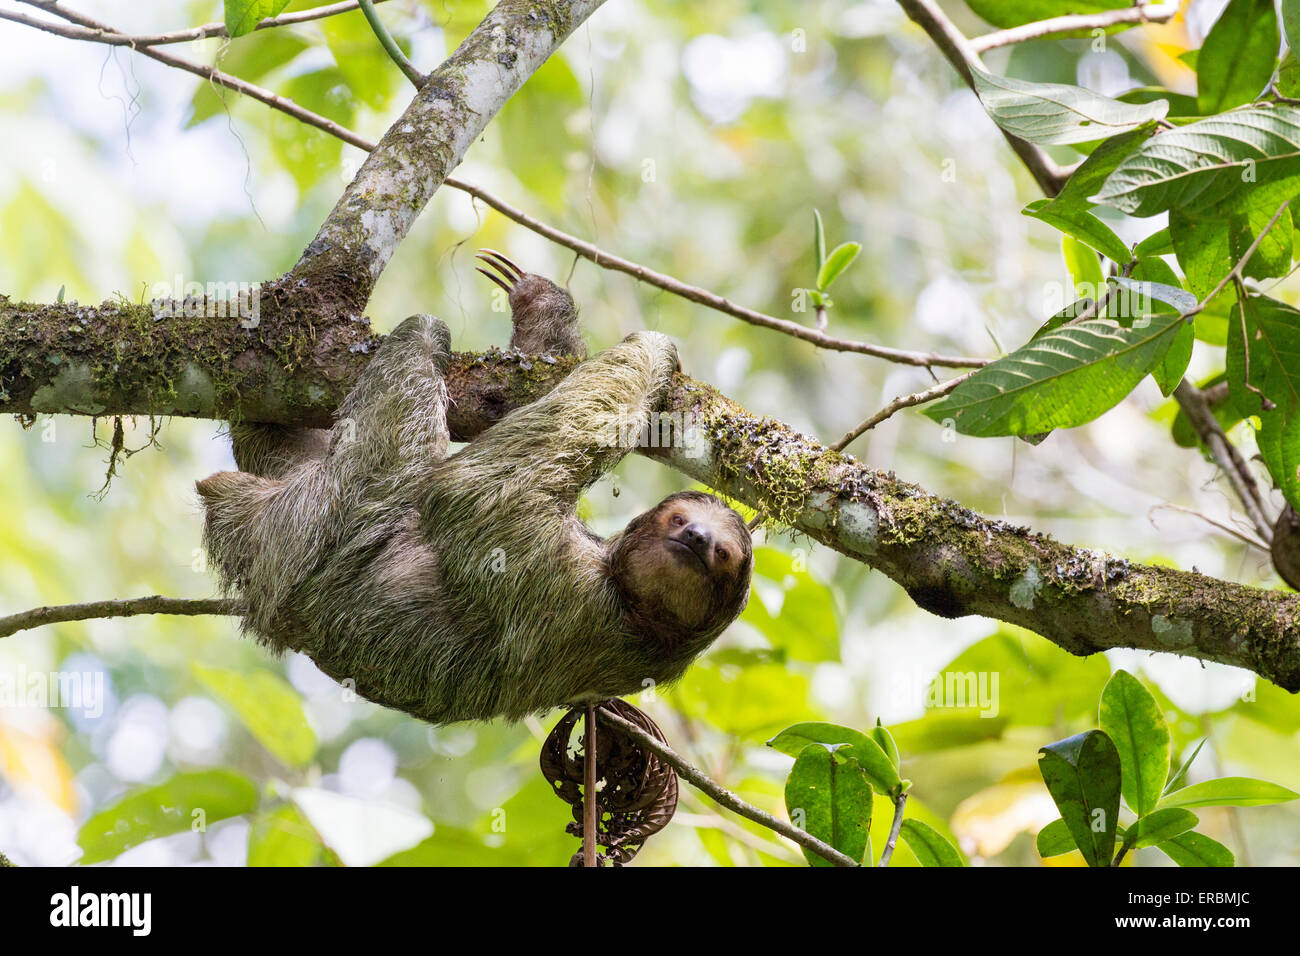 three-toed sloth hanging onto tree branch in rainforest, Costa Rica, central America Stock Photo